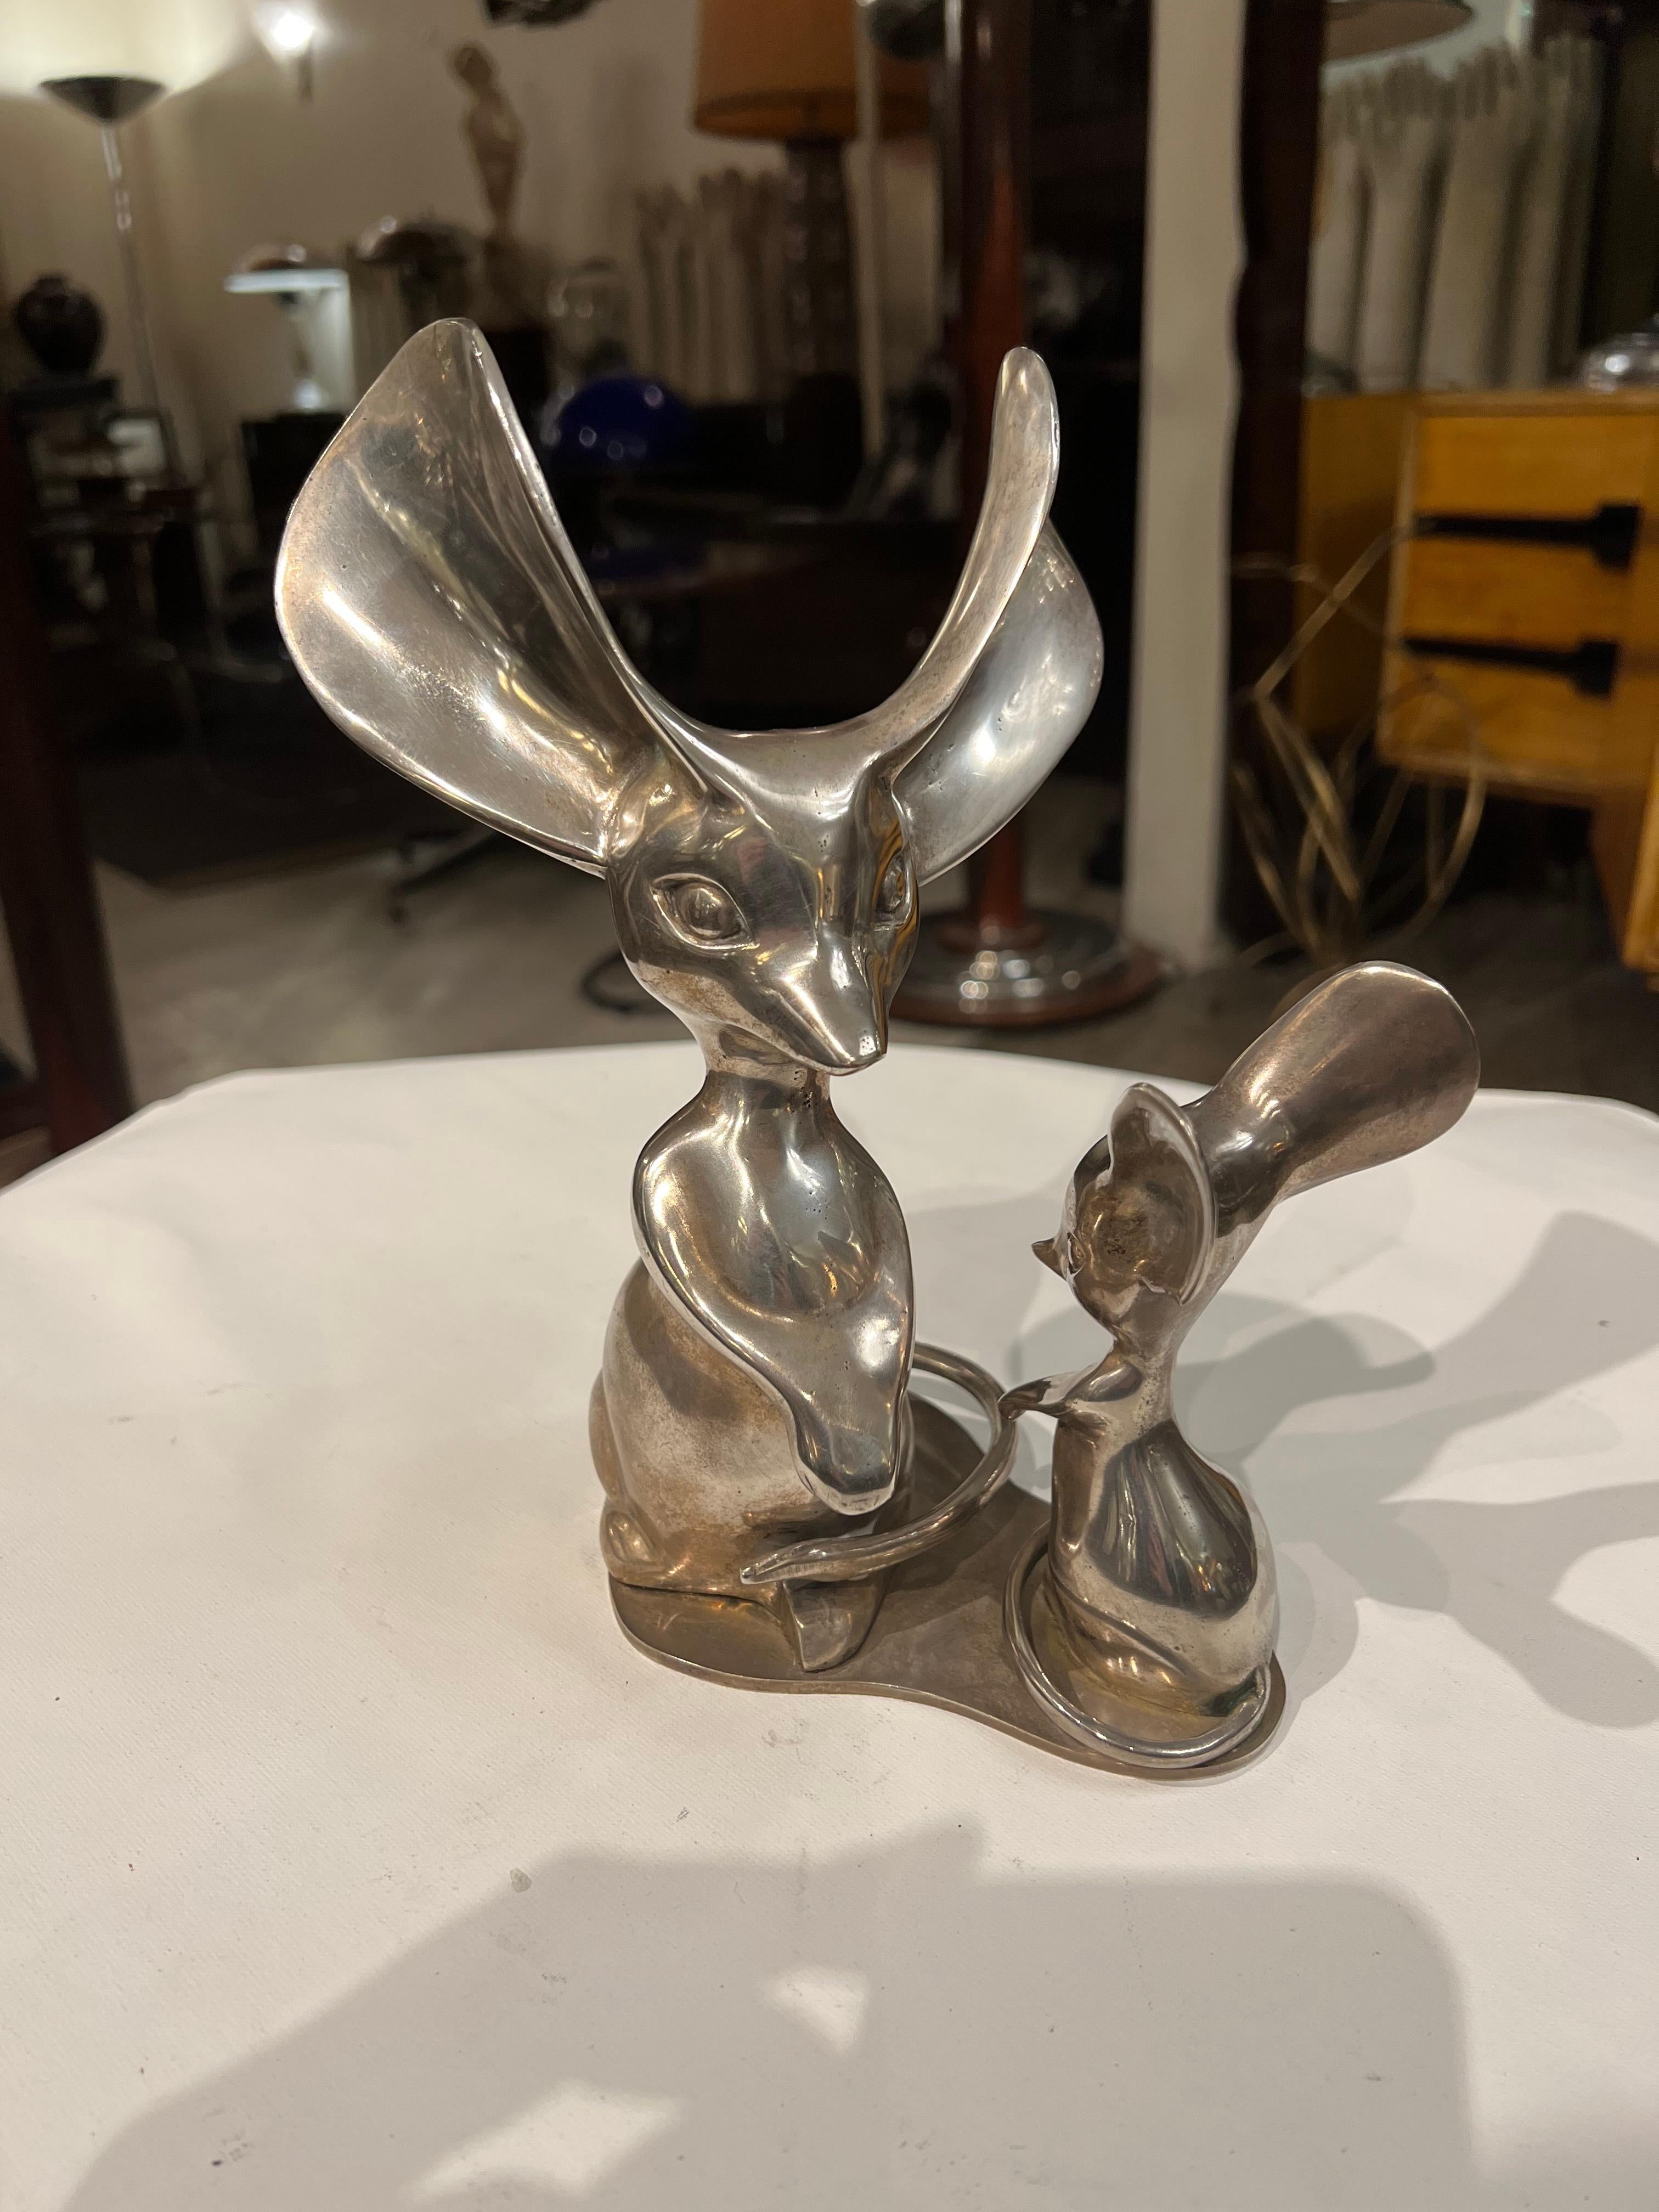 Material: silver plated bronze
We have specialized in the sale of Art Deco and Art Nouveau and Vintage styles since 1982. If you have any questions we are at your disposal.
Pushing the button that reads 'View All From Seller'. And you can see more